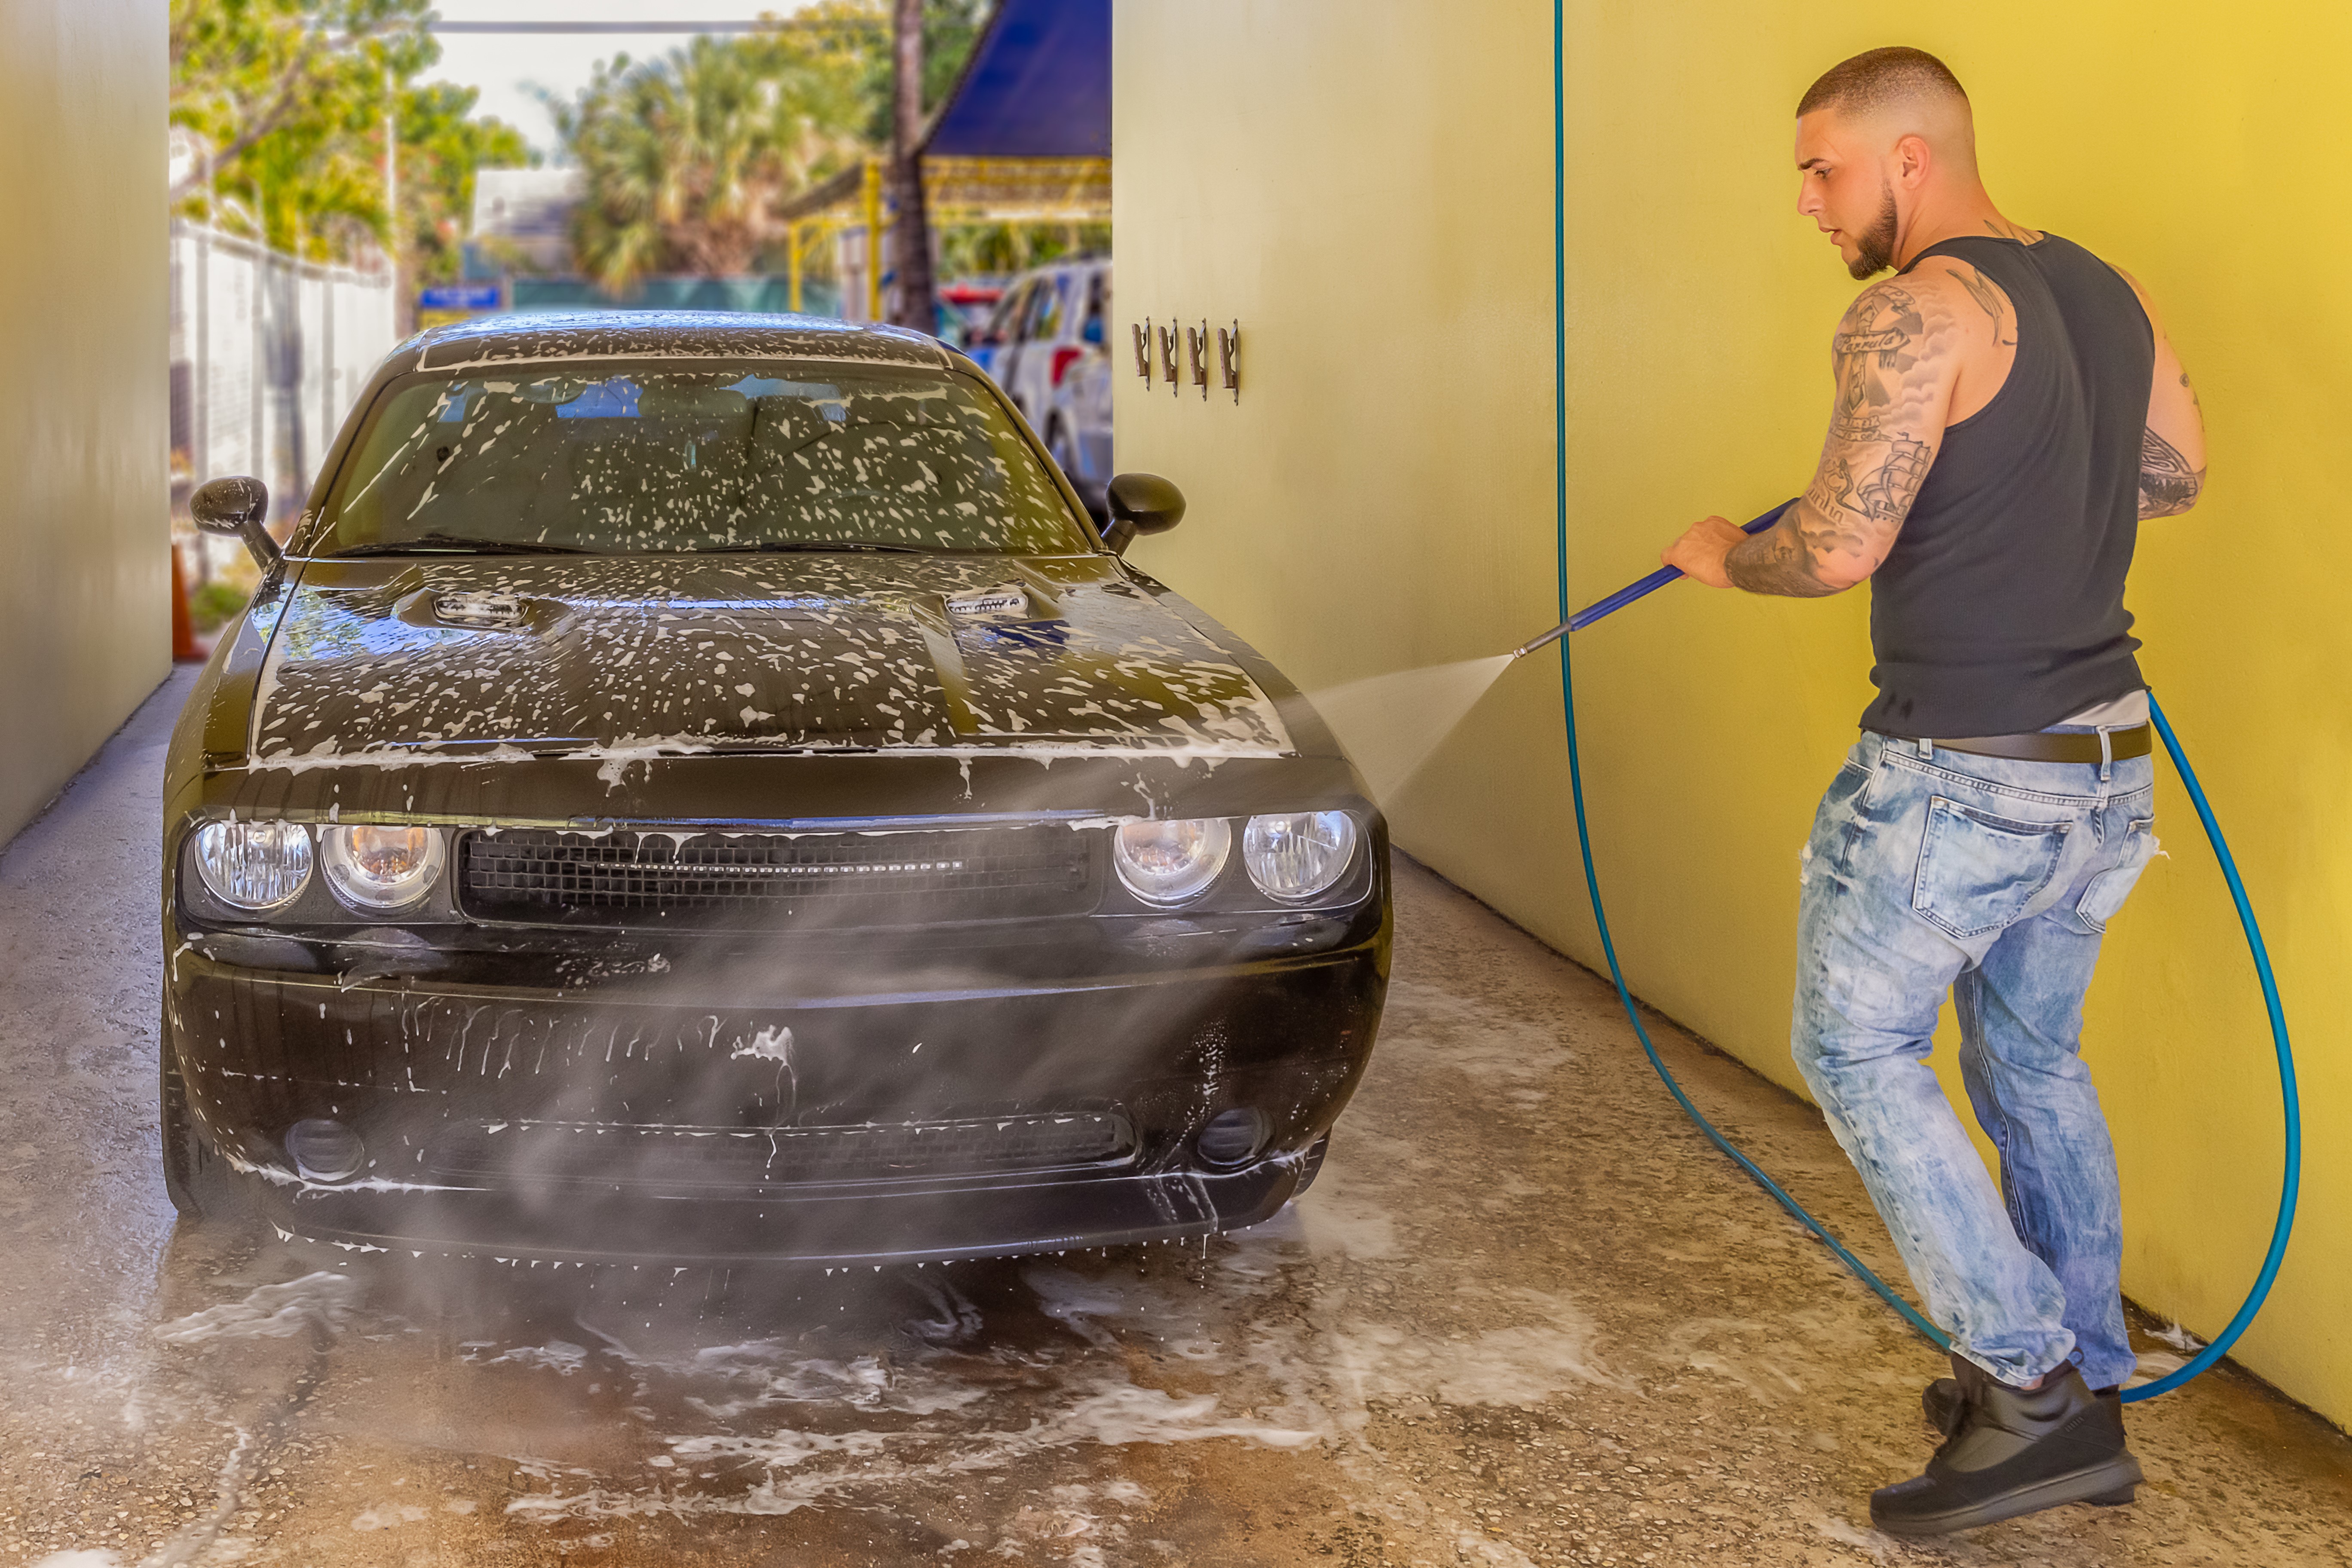 How to Be Water-Wise at Your Car Wash Using Simple Tips to Conserve Water